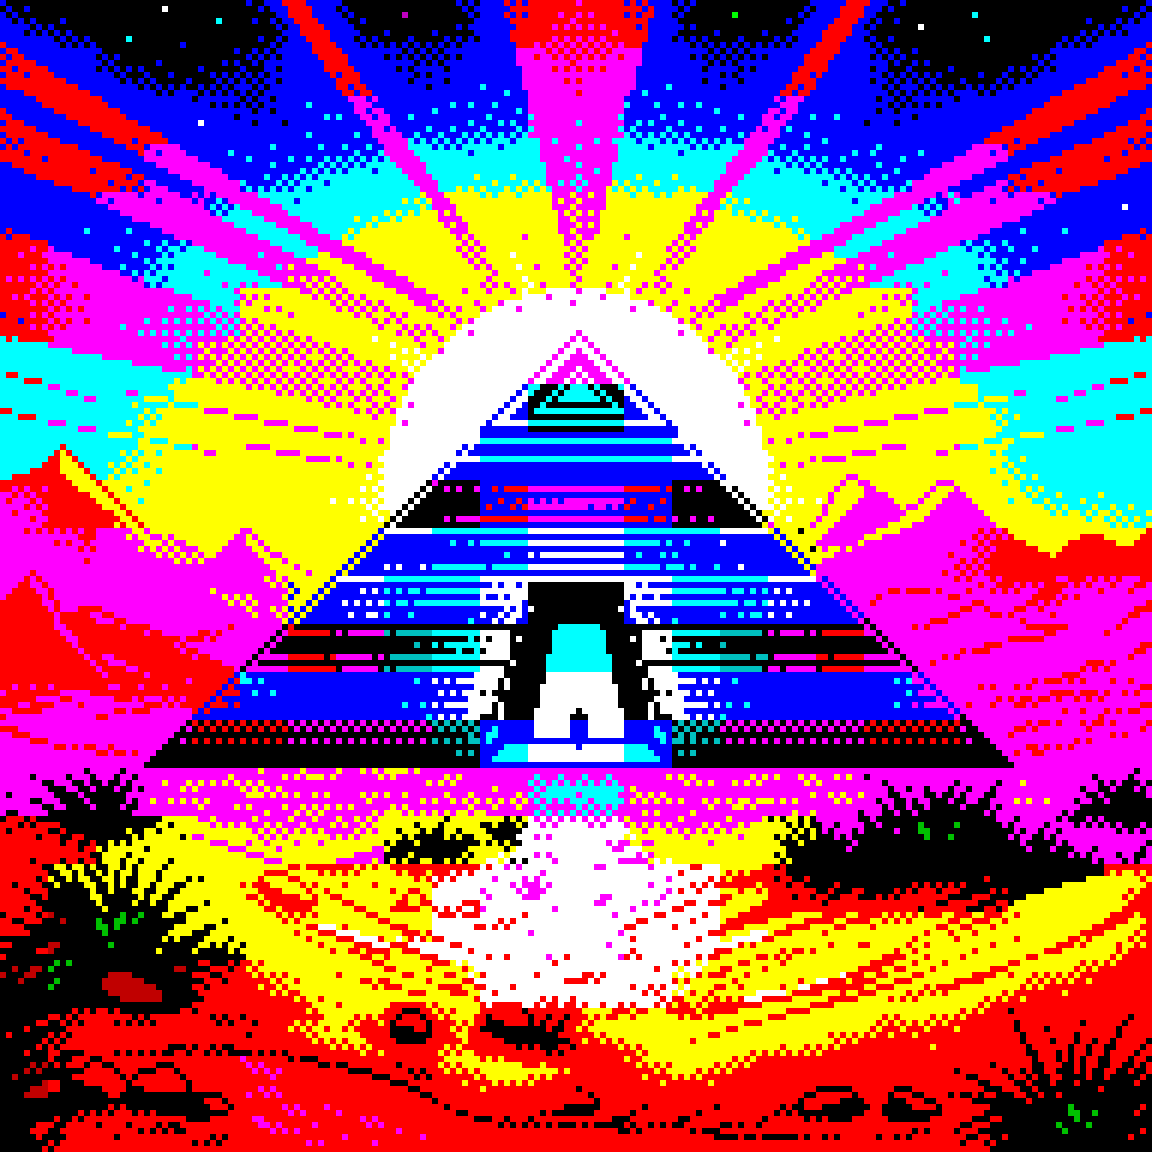 Pixel art of a neon-colored landscape with a central pyramid, radiant beams, mountains in the background, and a starry sky. A dark figure is standing in the huge entrance.